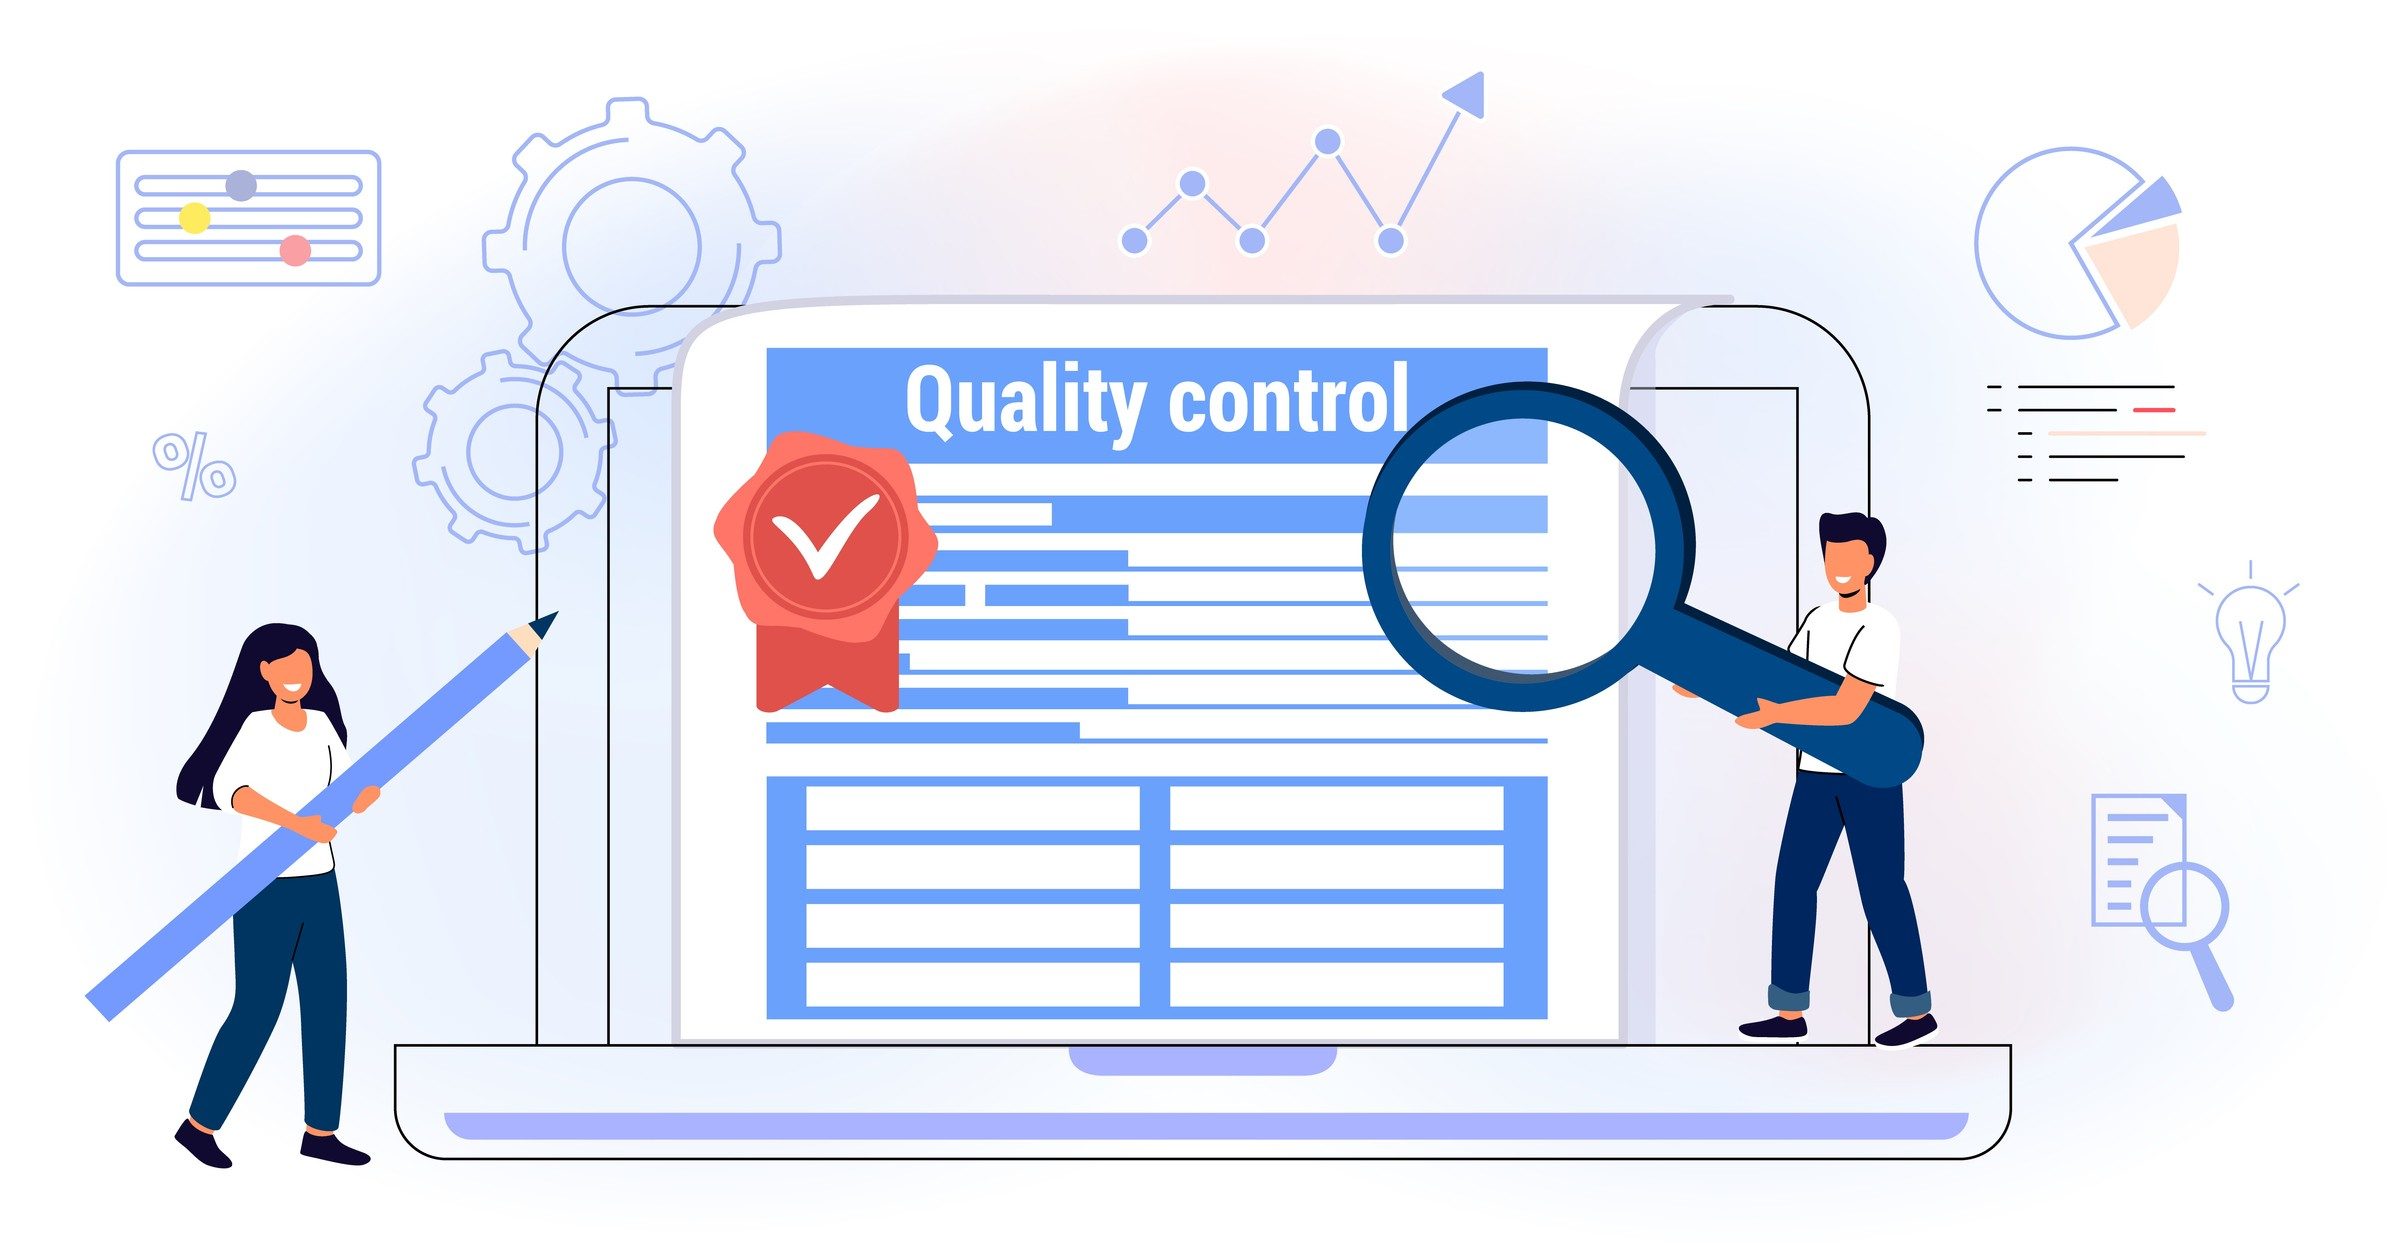 Quality control and product satisfaction research check Controlling business iso standard certificate accept Validation documents Inspection errors or mistakes Vector illustration concept Flat style